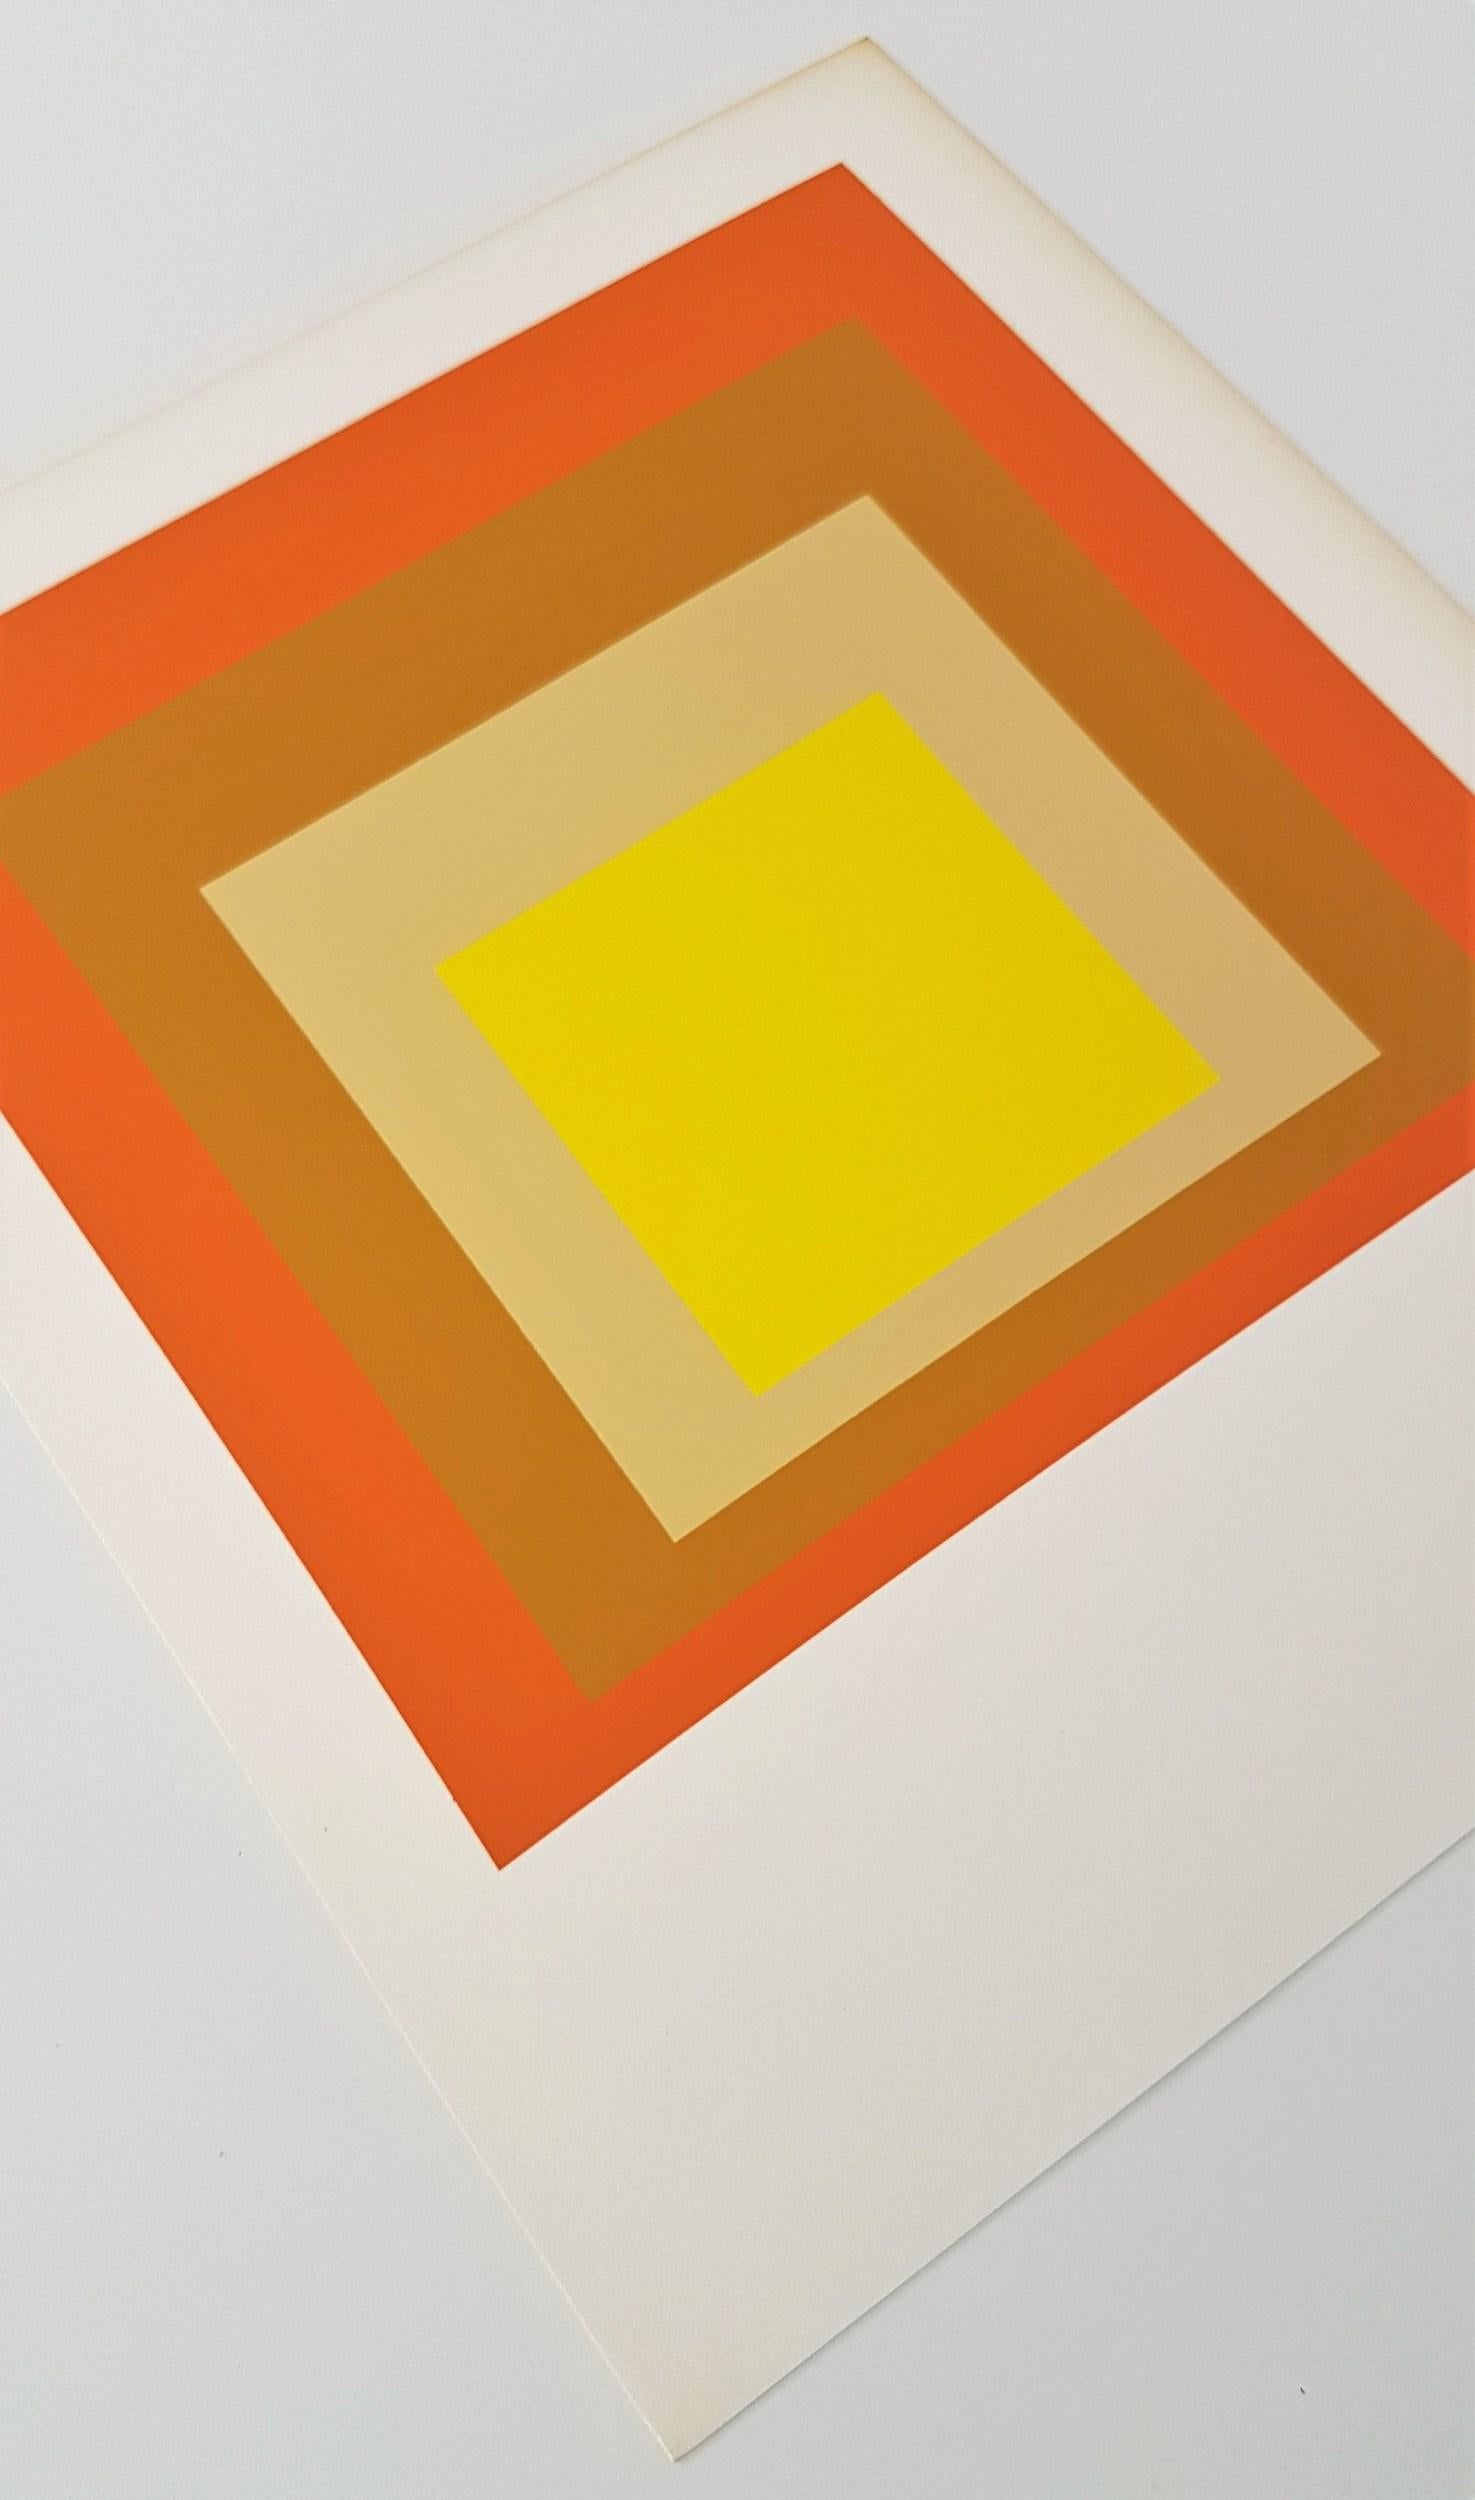 Homage to the Square: Yes Sir! (~28% OFF LIST PRICE - LIMITED TIME ONLY) - Abstract Print by (after) Josef Albers